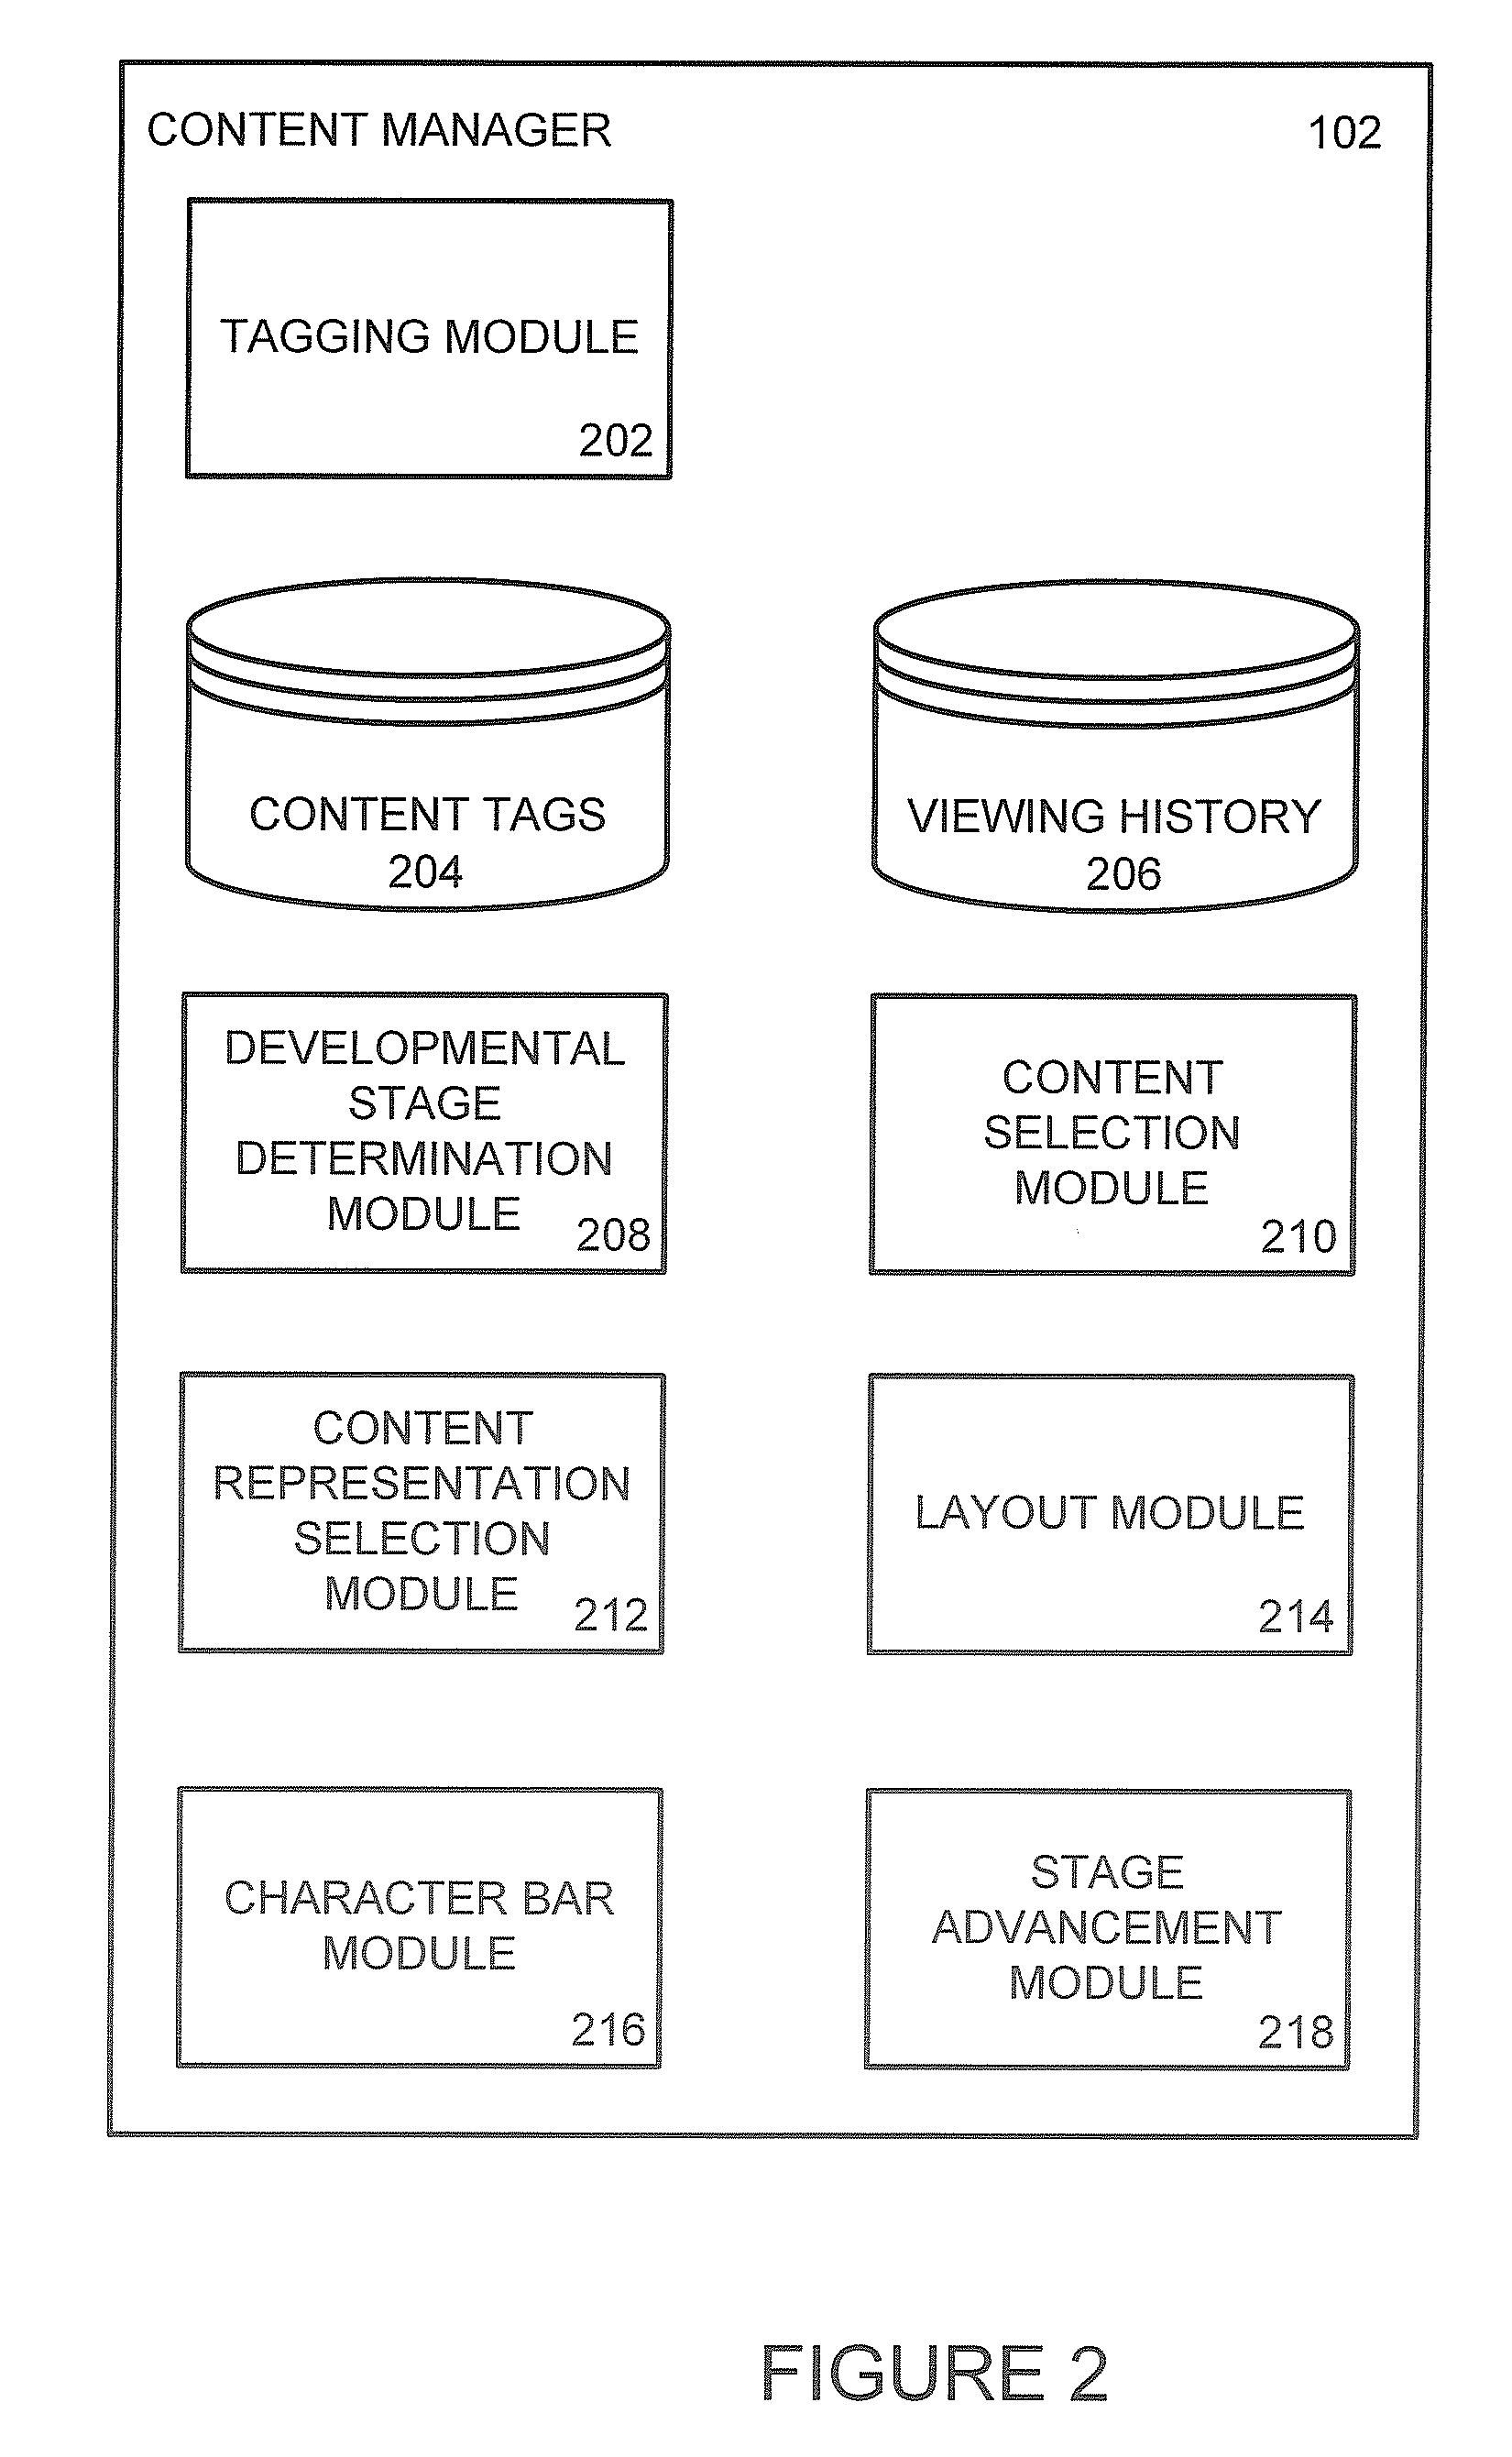 Systems and methods for presenting content and representations of content according to developmental stage